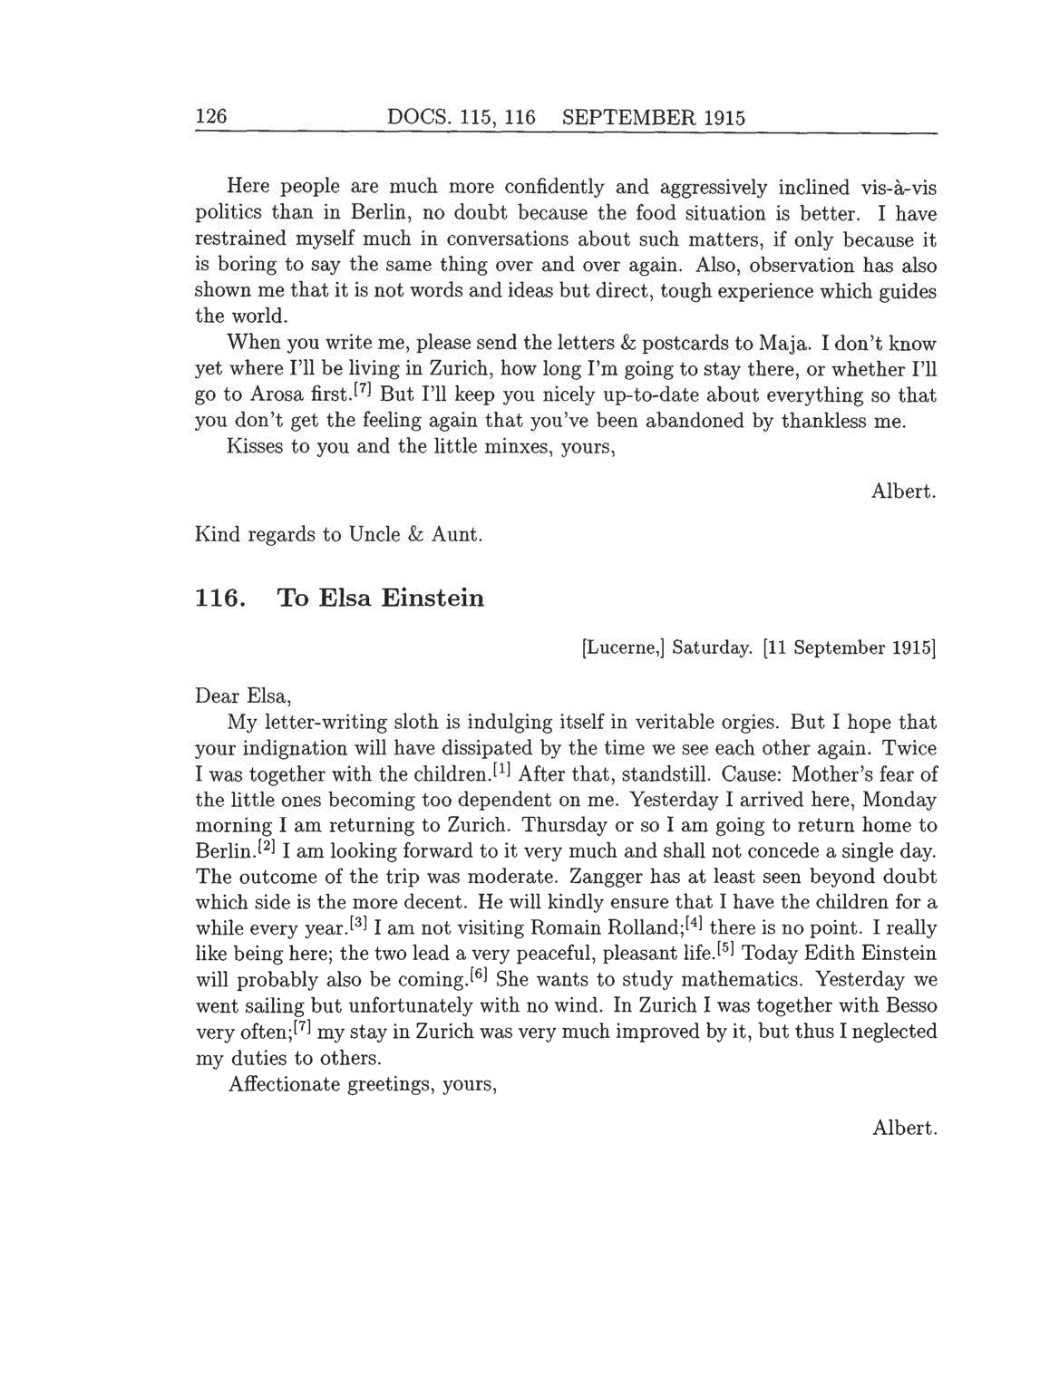 Volume 8: The Berlin Years: Correspondence, 1914-1918 (English translation supplement) page 126